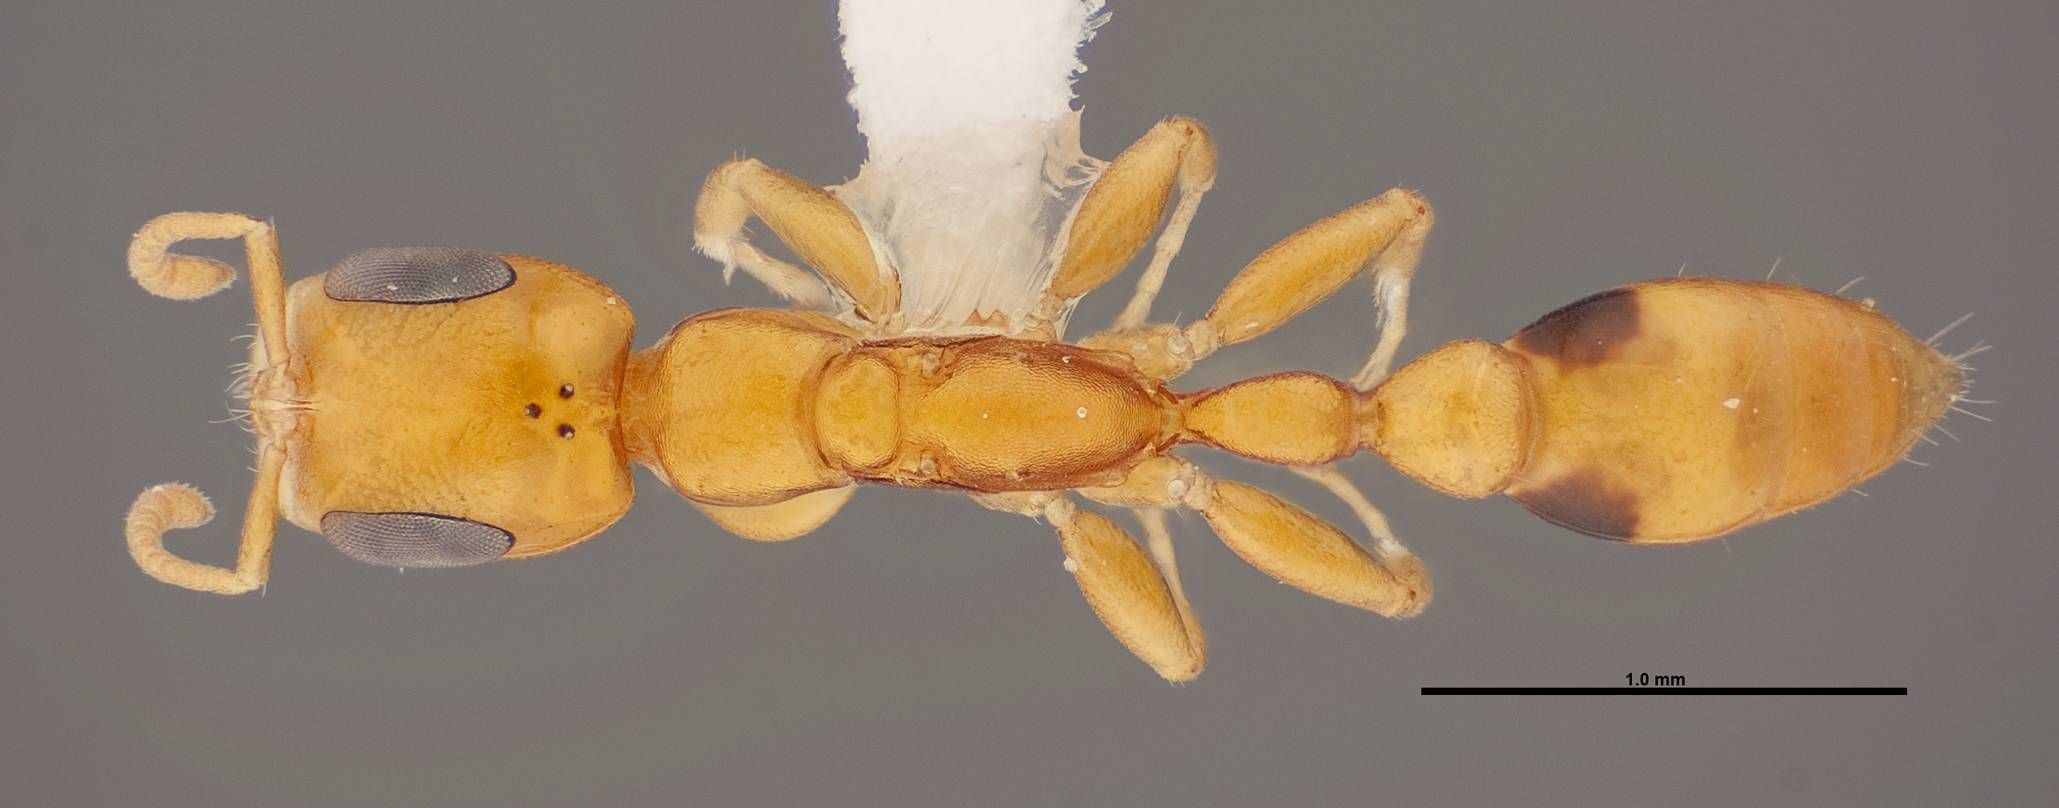 Dorsal view of Pseudomyrmex simplex showing the brown-black spots on the gaster and lack of setae on the first gastral segment. 